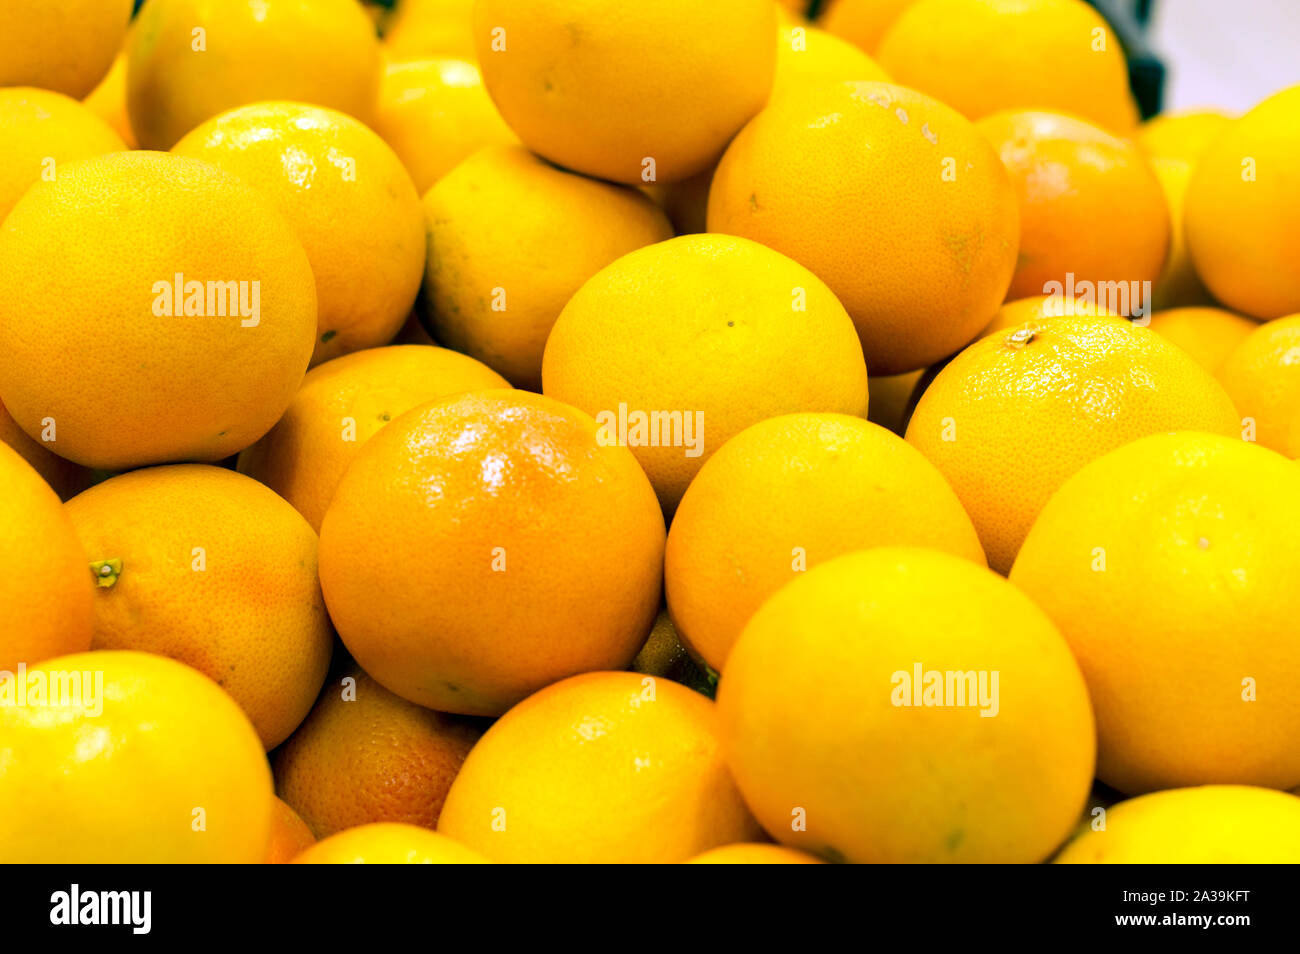 Juicy, ripe oranges on the counter for sale. Stock Photo